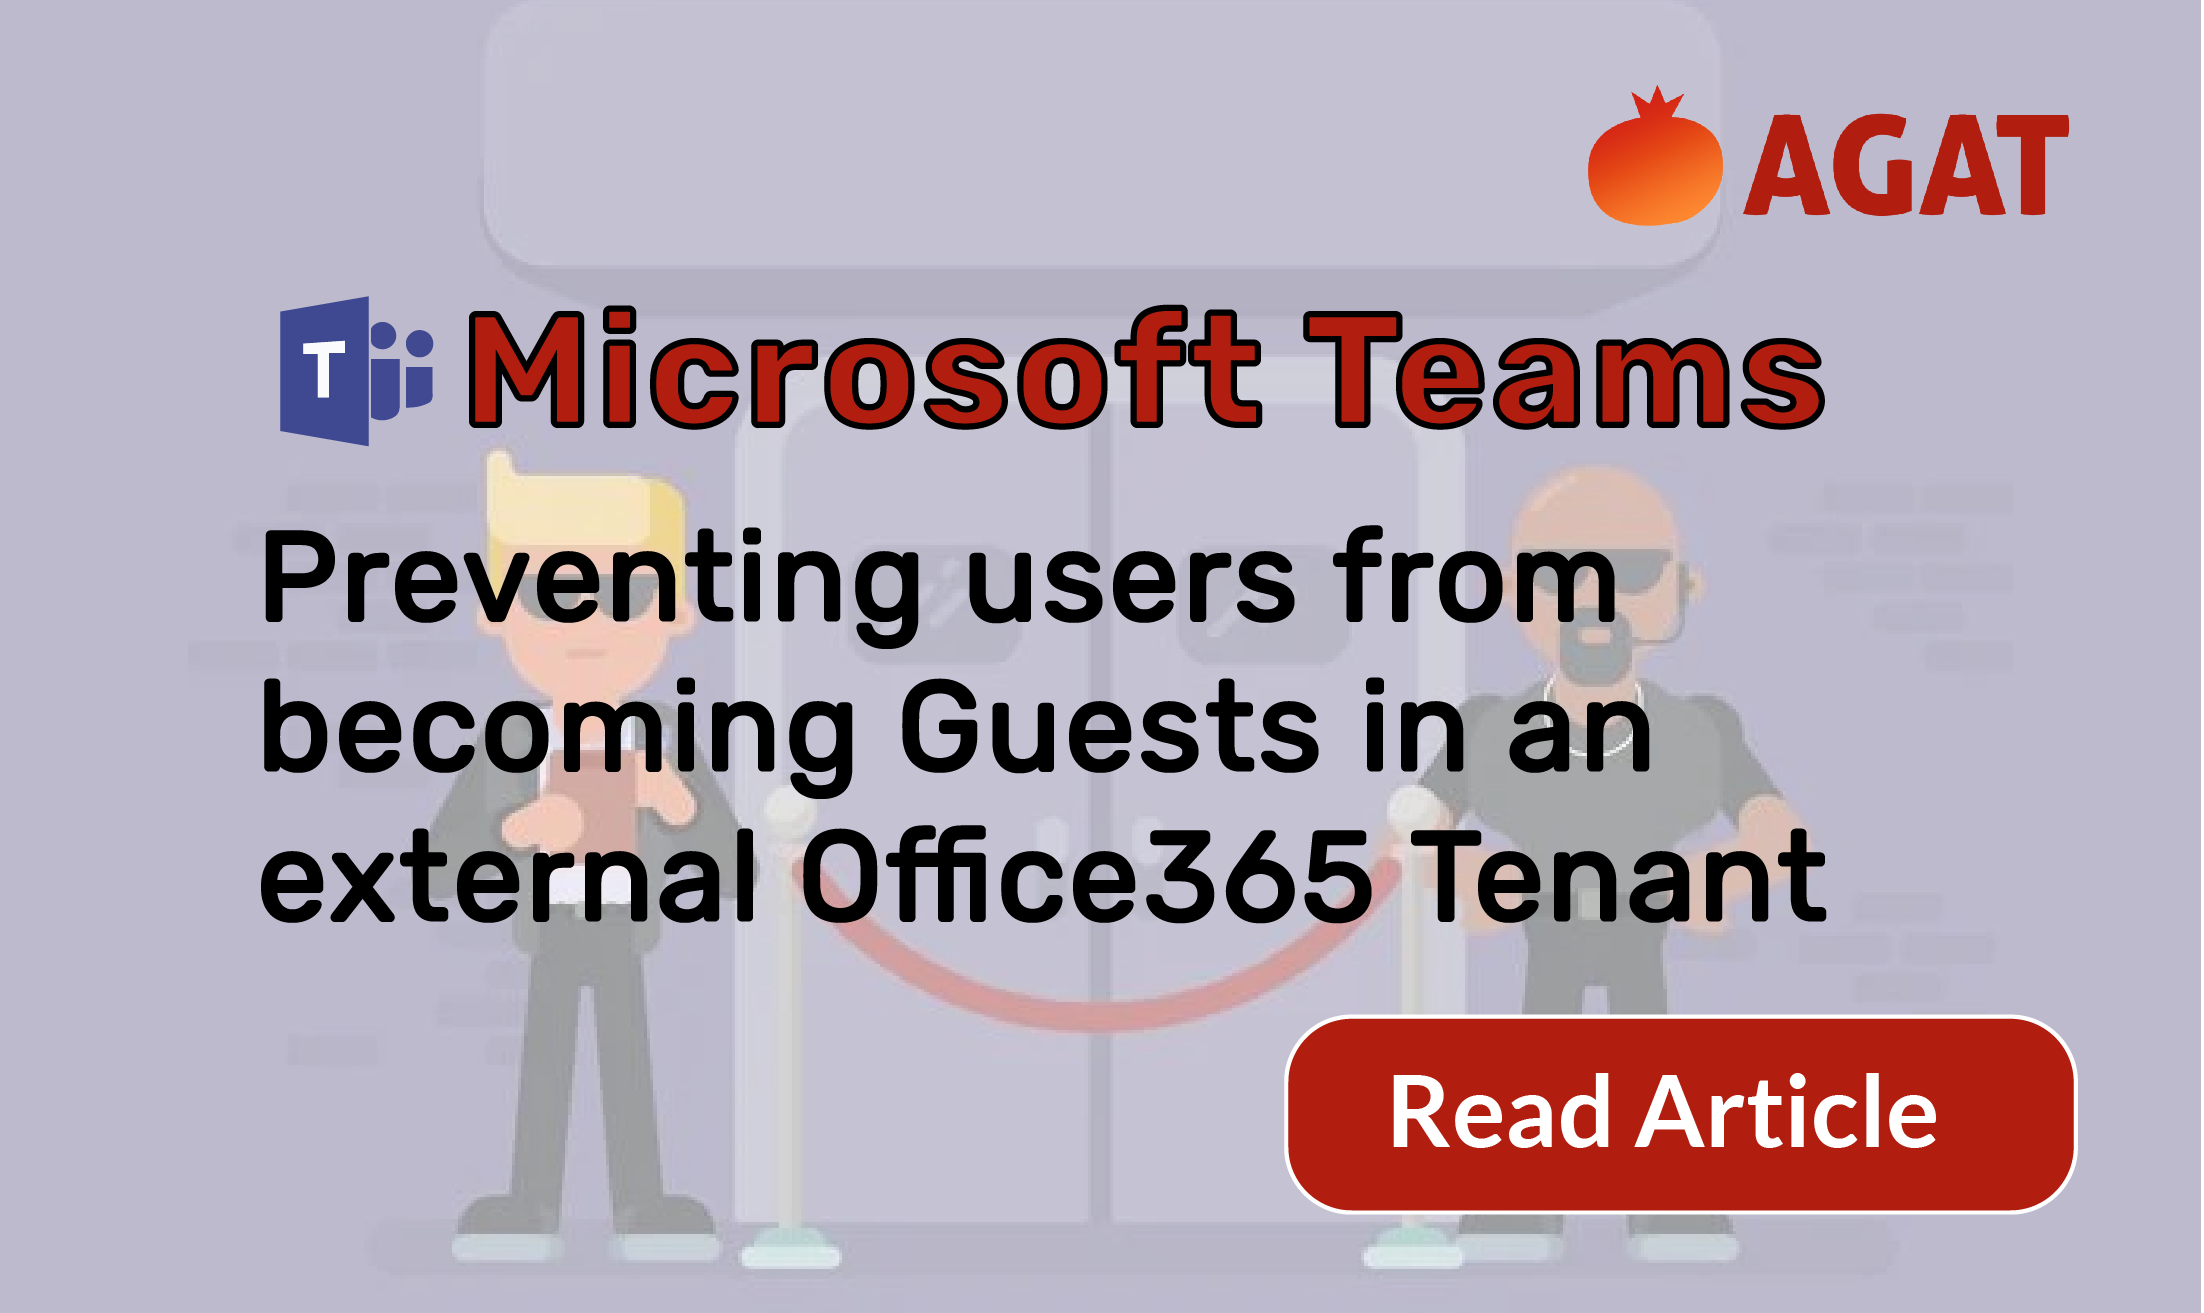 Microsoft Teams Preventing users from becoming Guests in an external Office365 Tenant